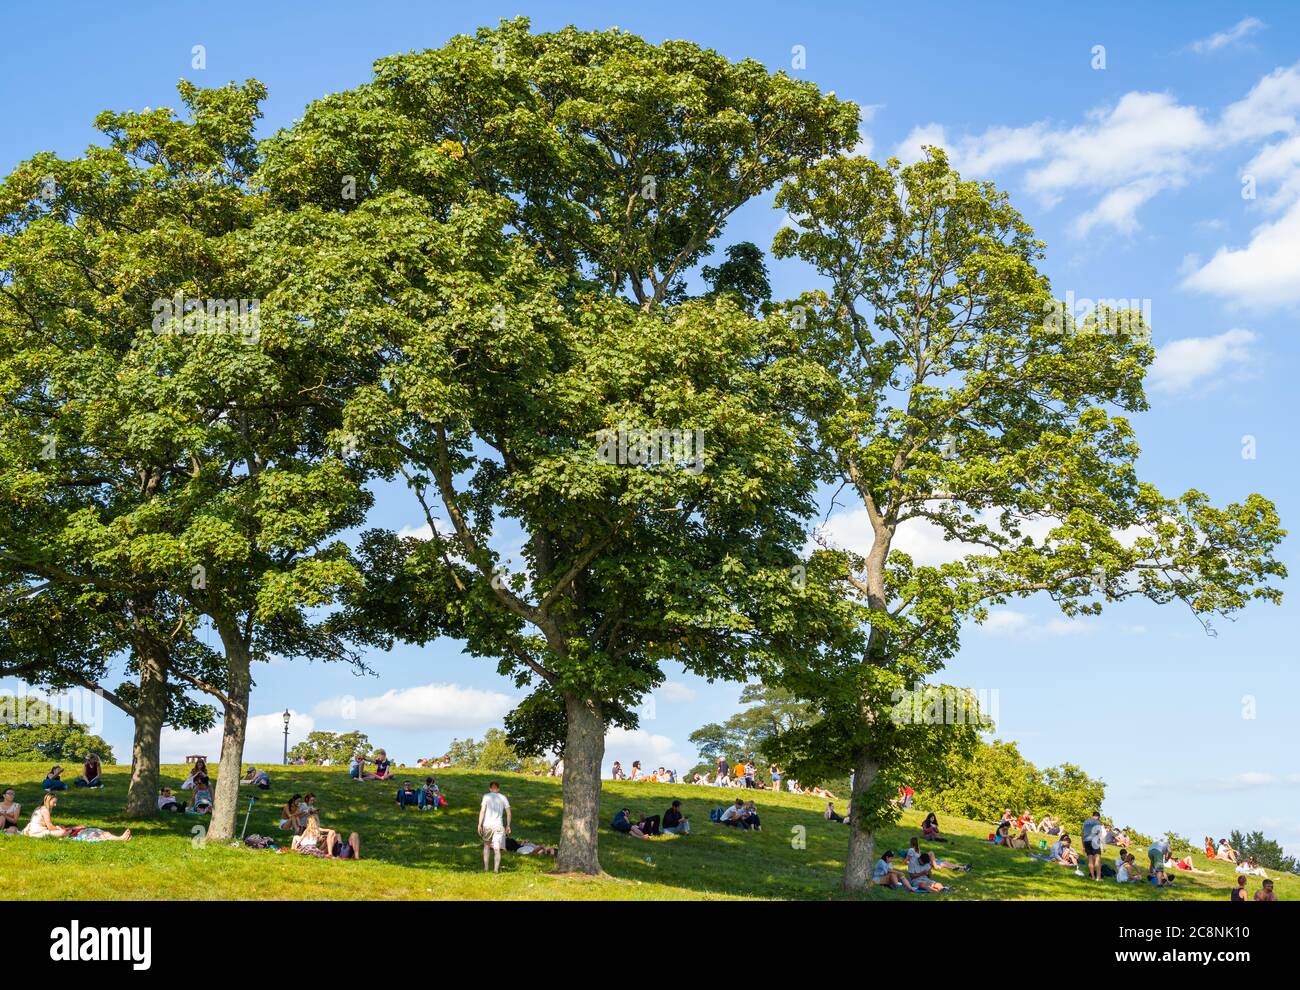 Visitors to Primrose Hill in London relax under or near massive, imposing trees. Set against a blue sky with white clouds on a stunning autumn day. Stock Photo